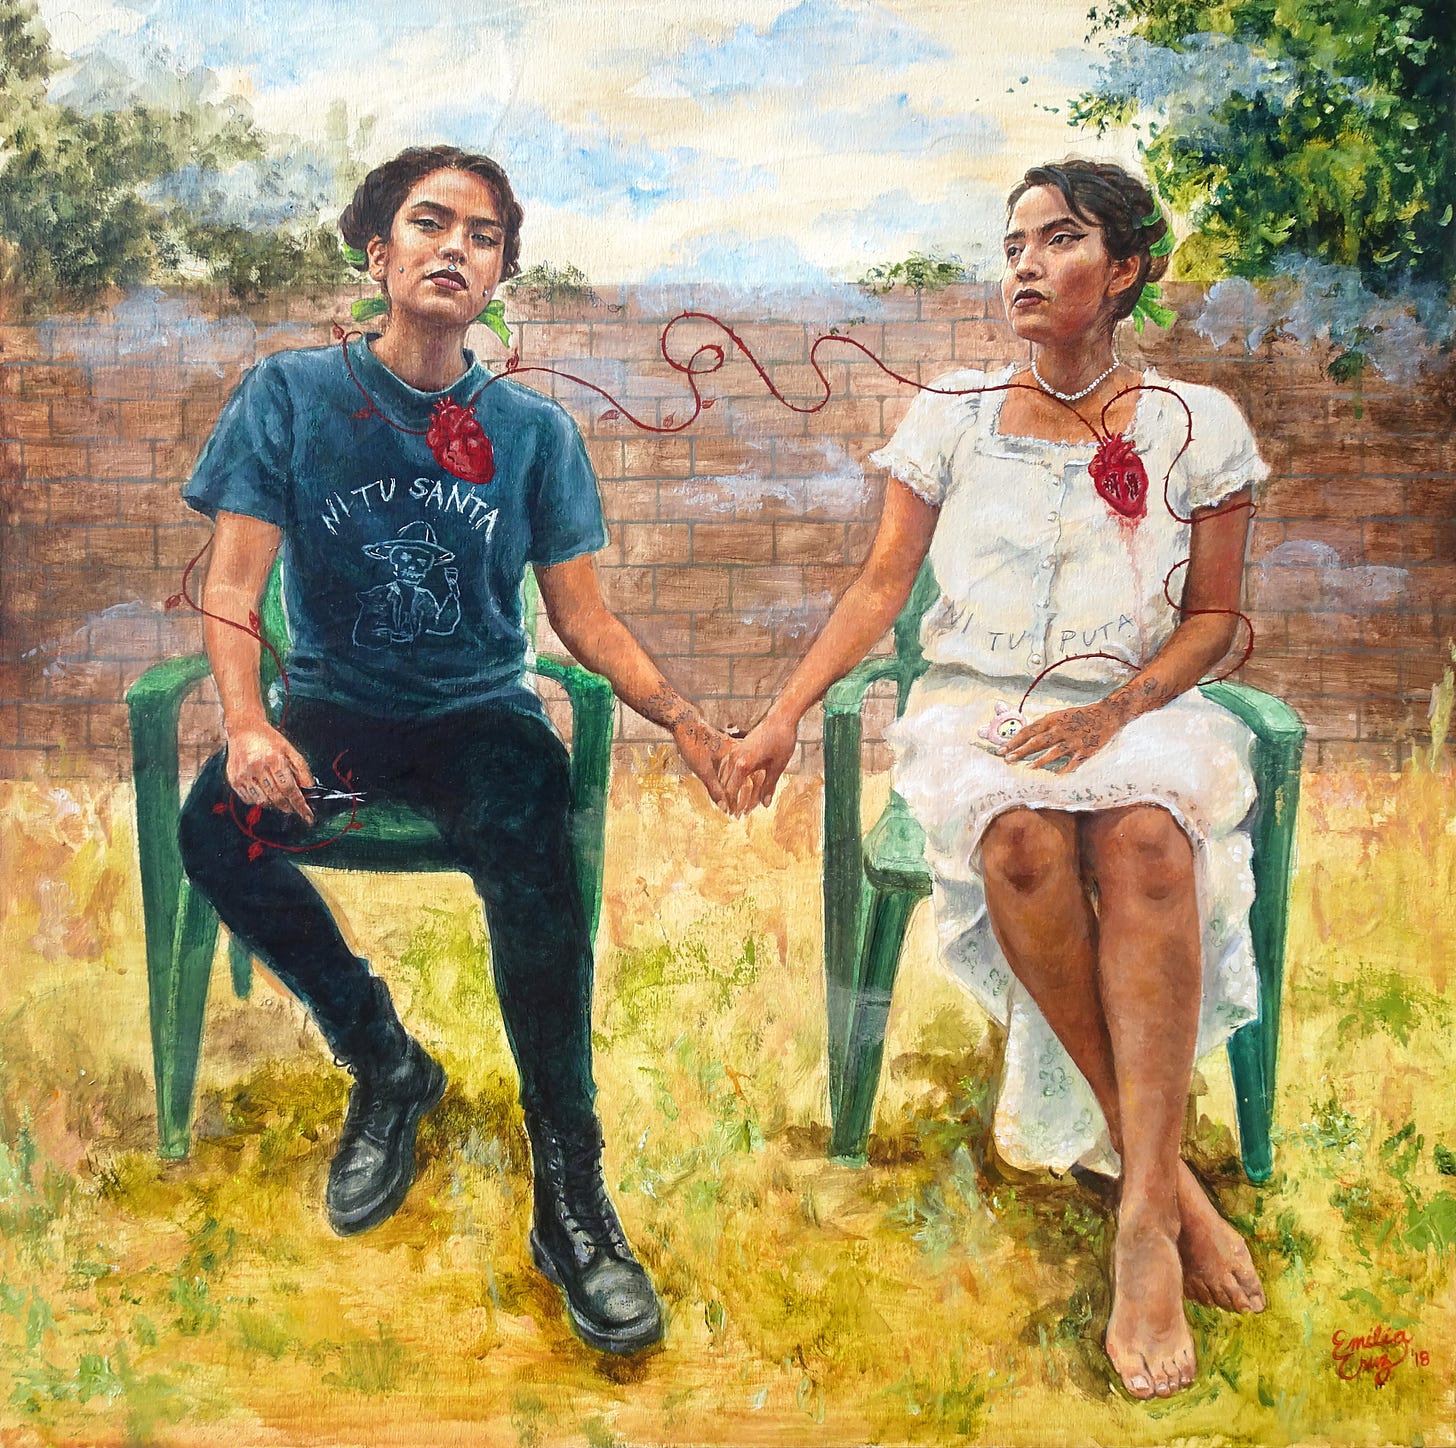 Painting of two women sitting side by side in green chairs on yellow grass against a brick wall, holding hands 